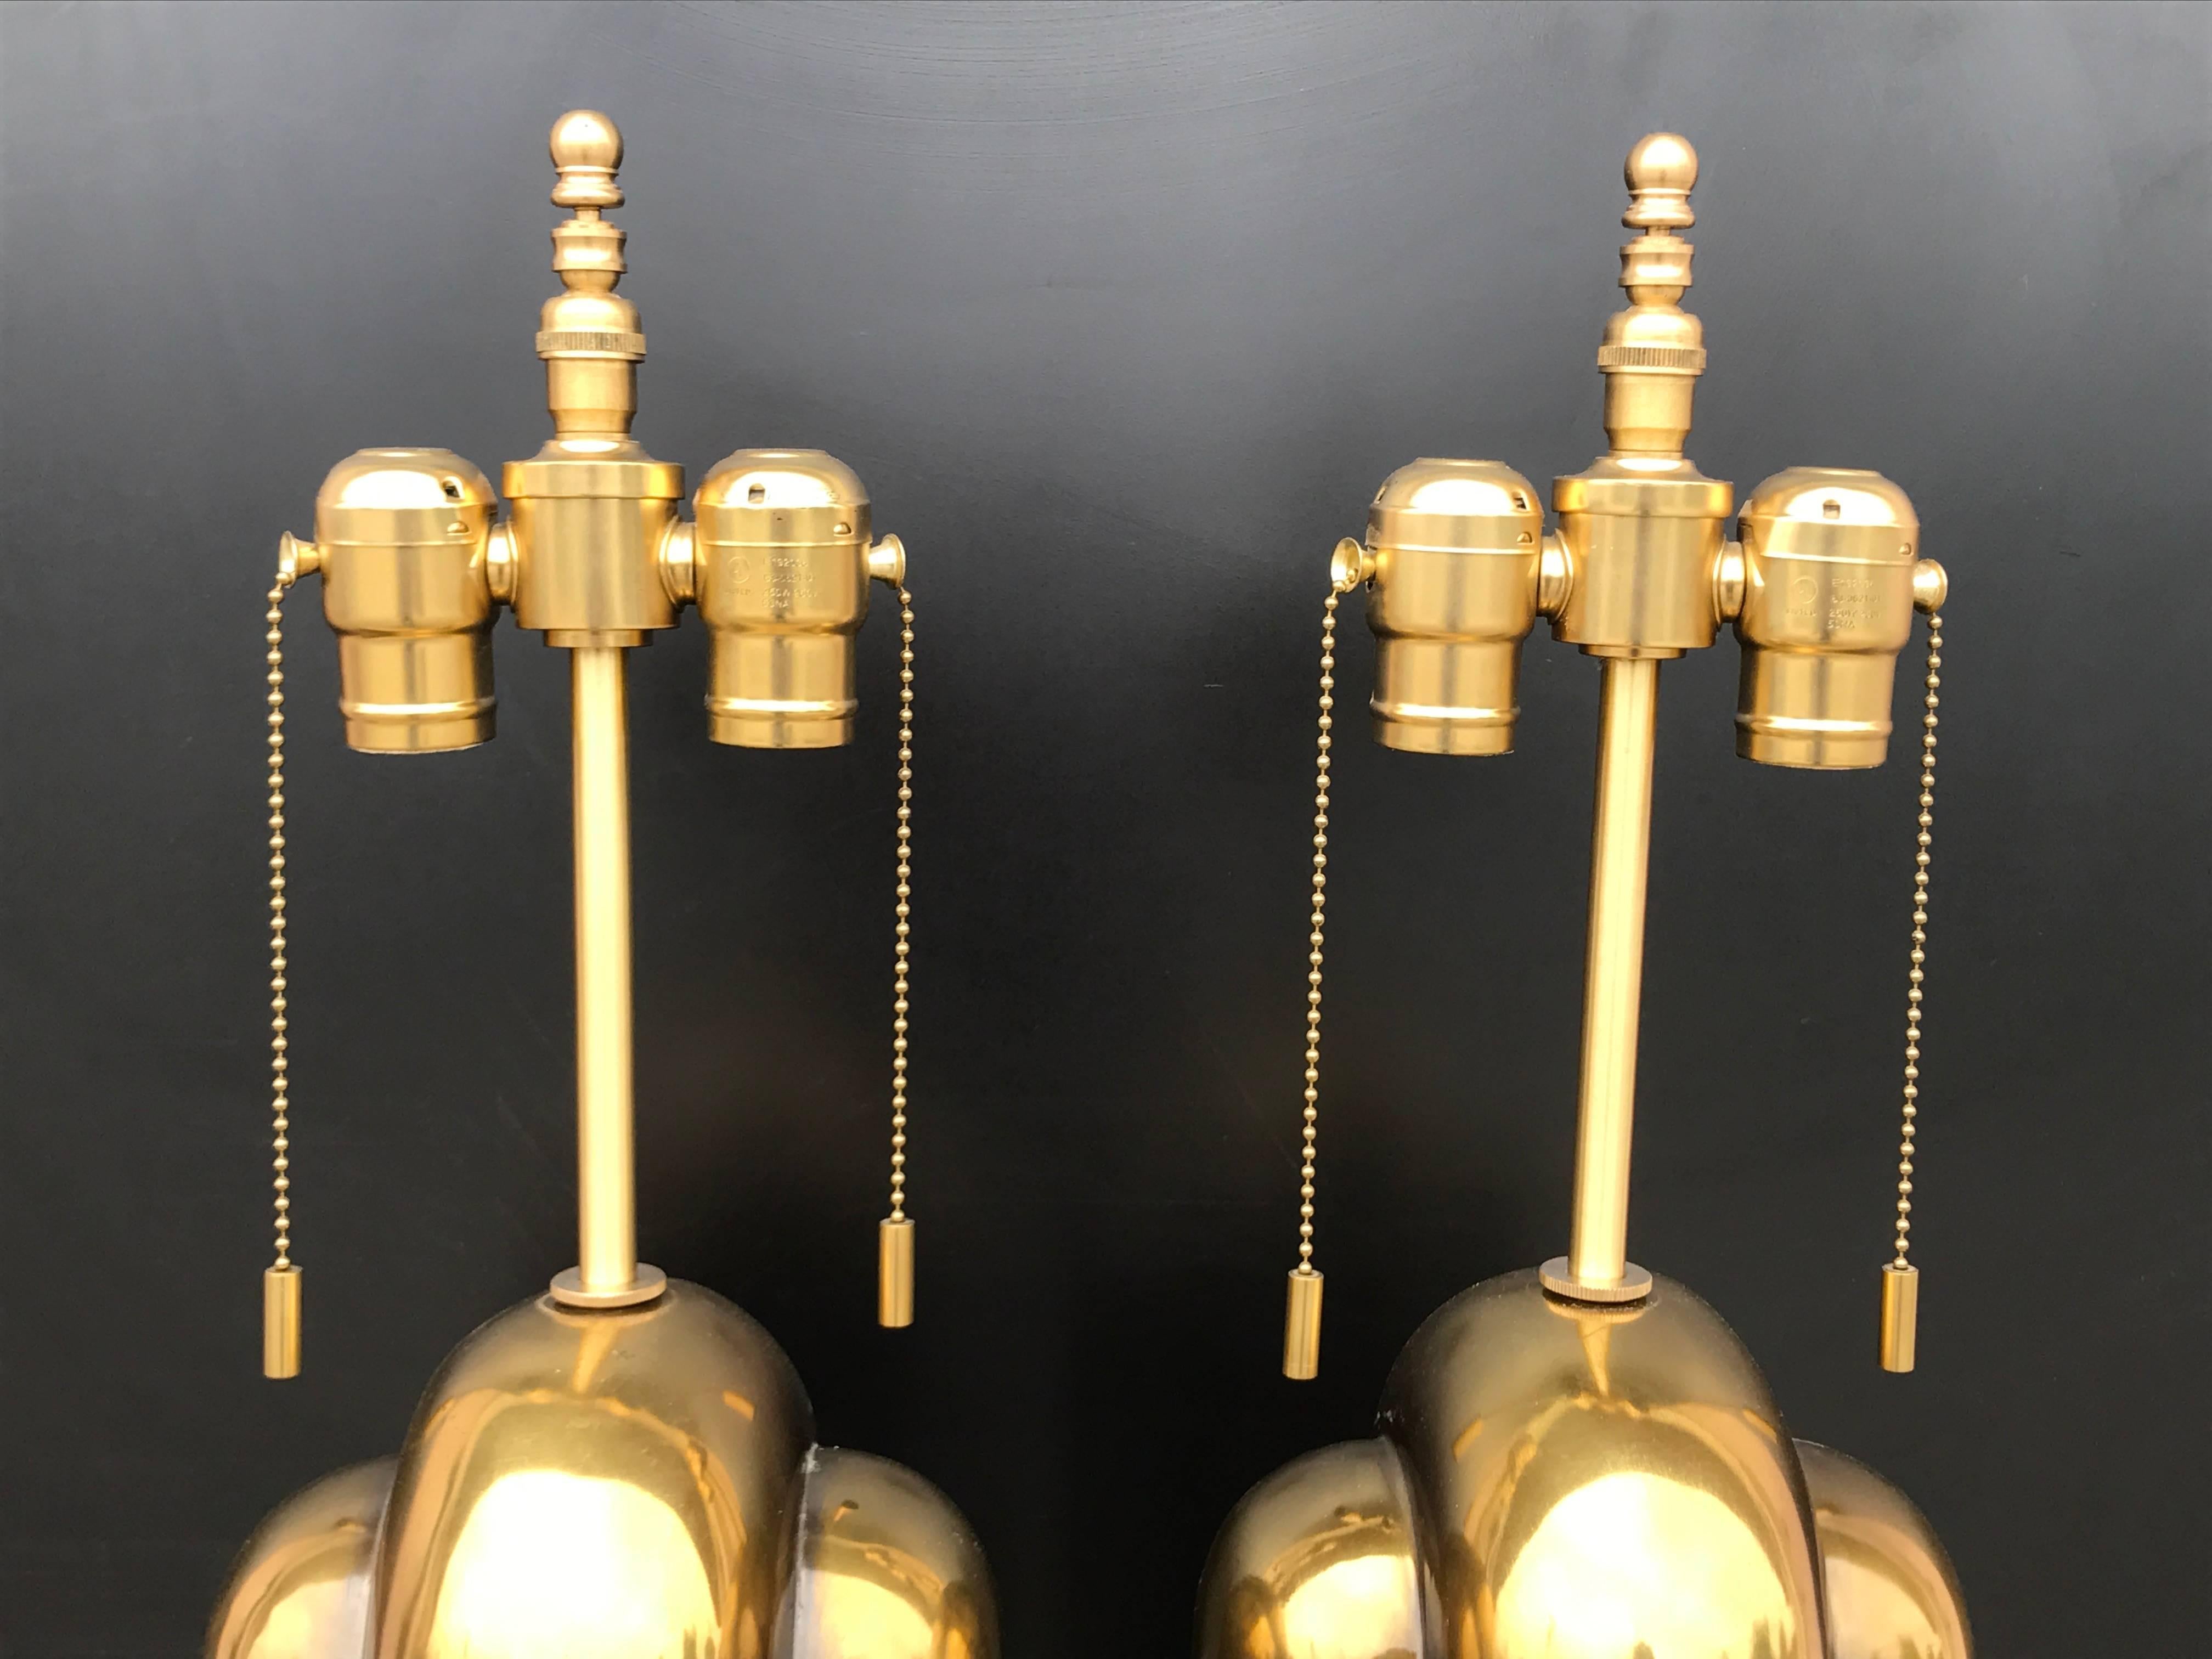 Plated Pair of Patinated Brass Art Deco Style Lamps by Westwood